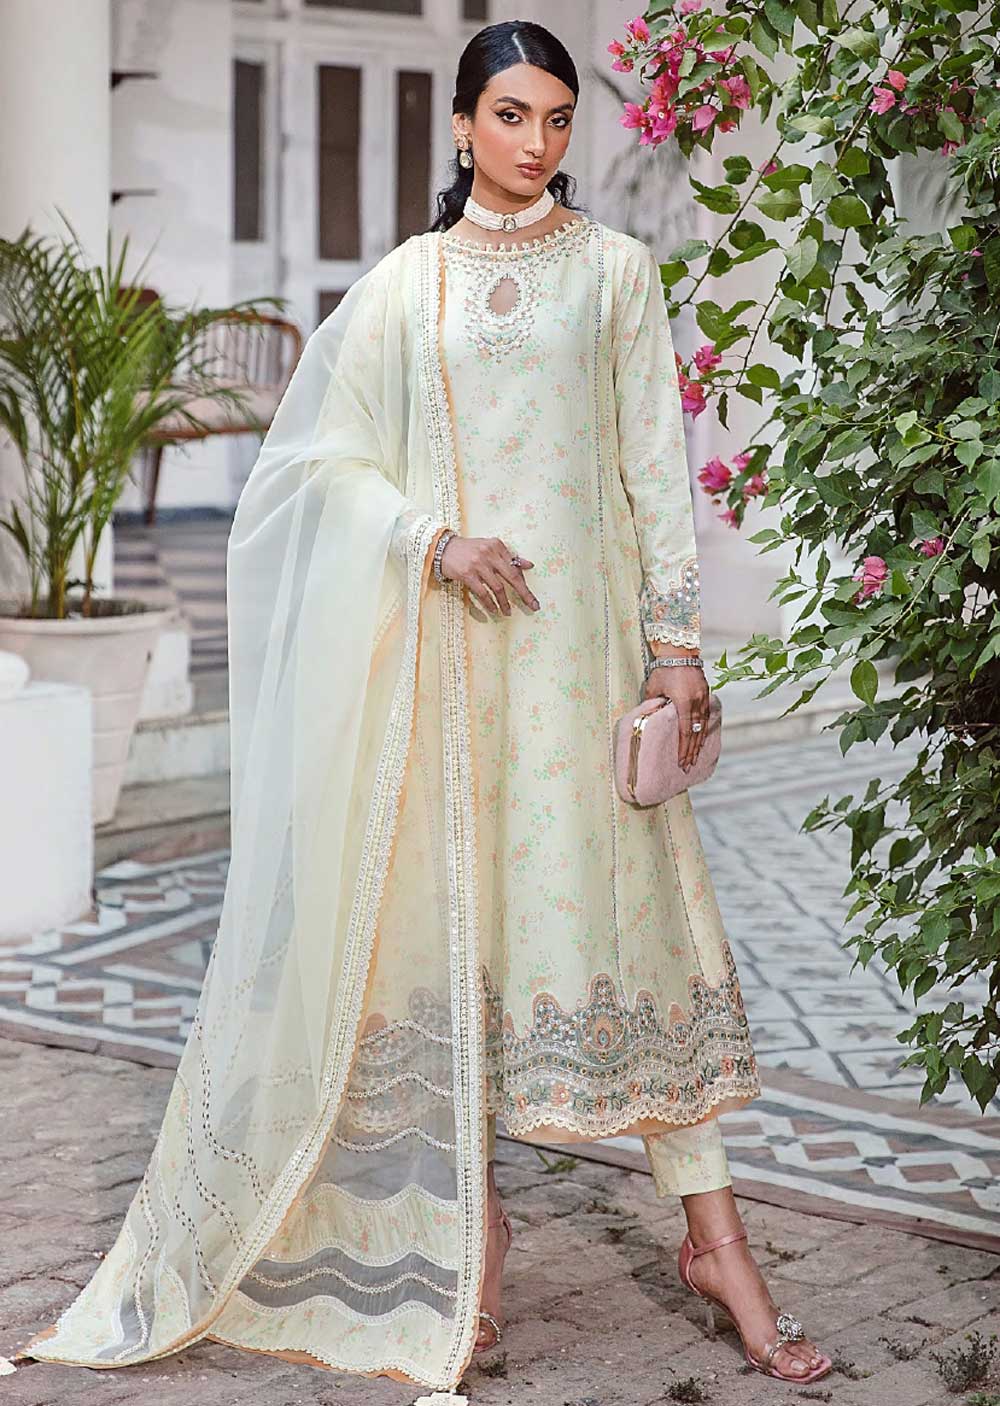 IRA-06 - Lime Primerose - Readymade - Iris Embroidered Lawn Eid Collection 2023 - Memsaab Online